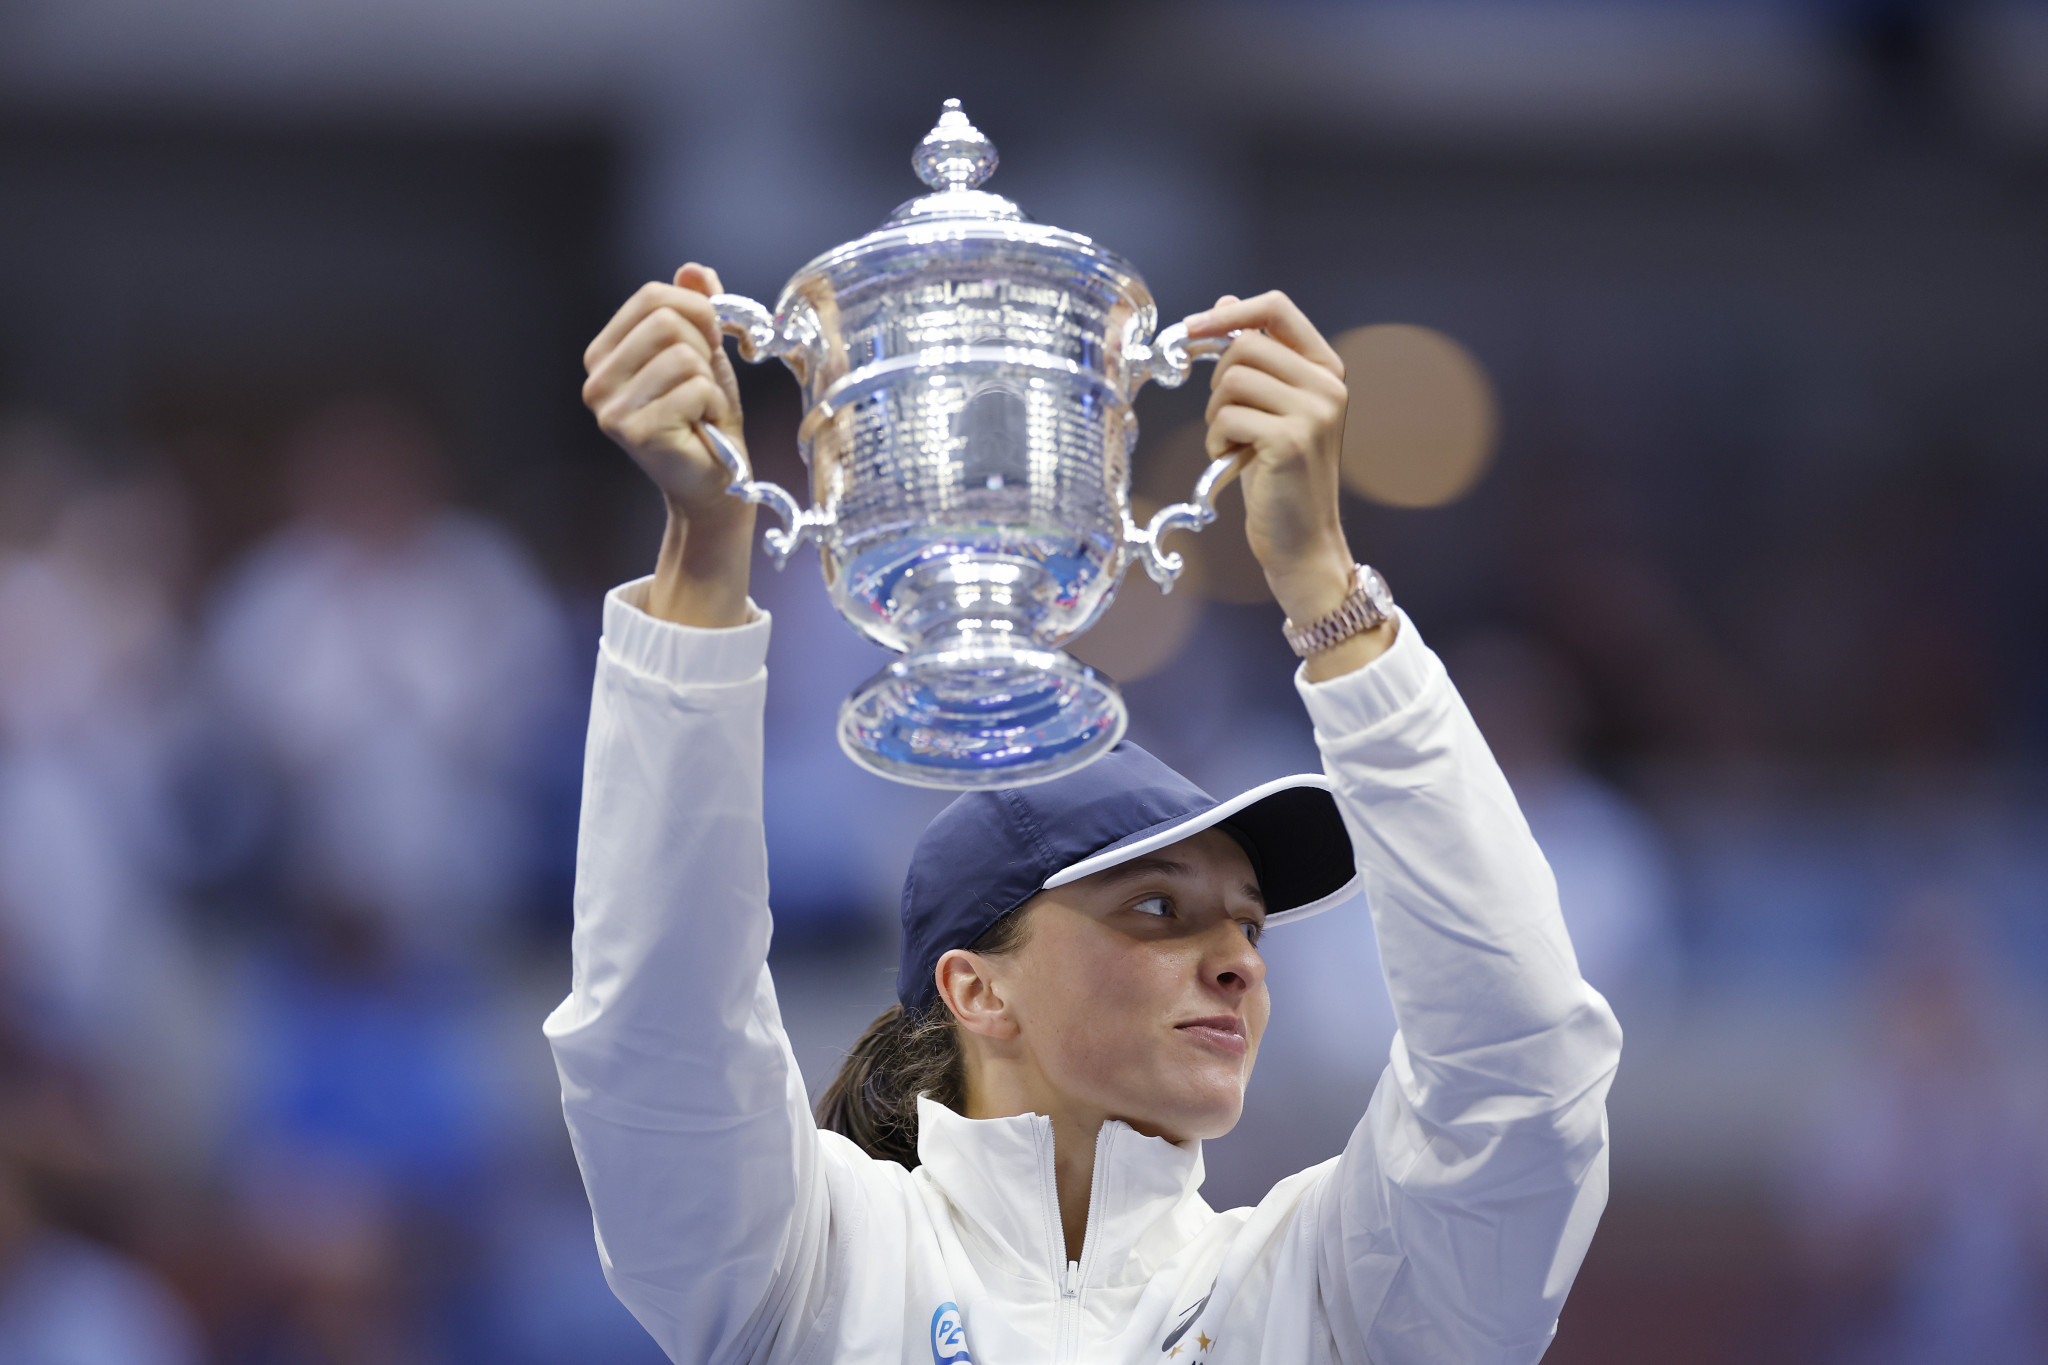 Iga Świątek beat Ons Jabeur to win the US Open women's singles title ©Getty Images